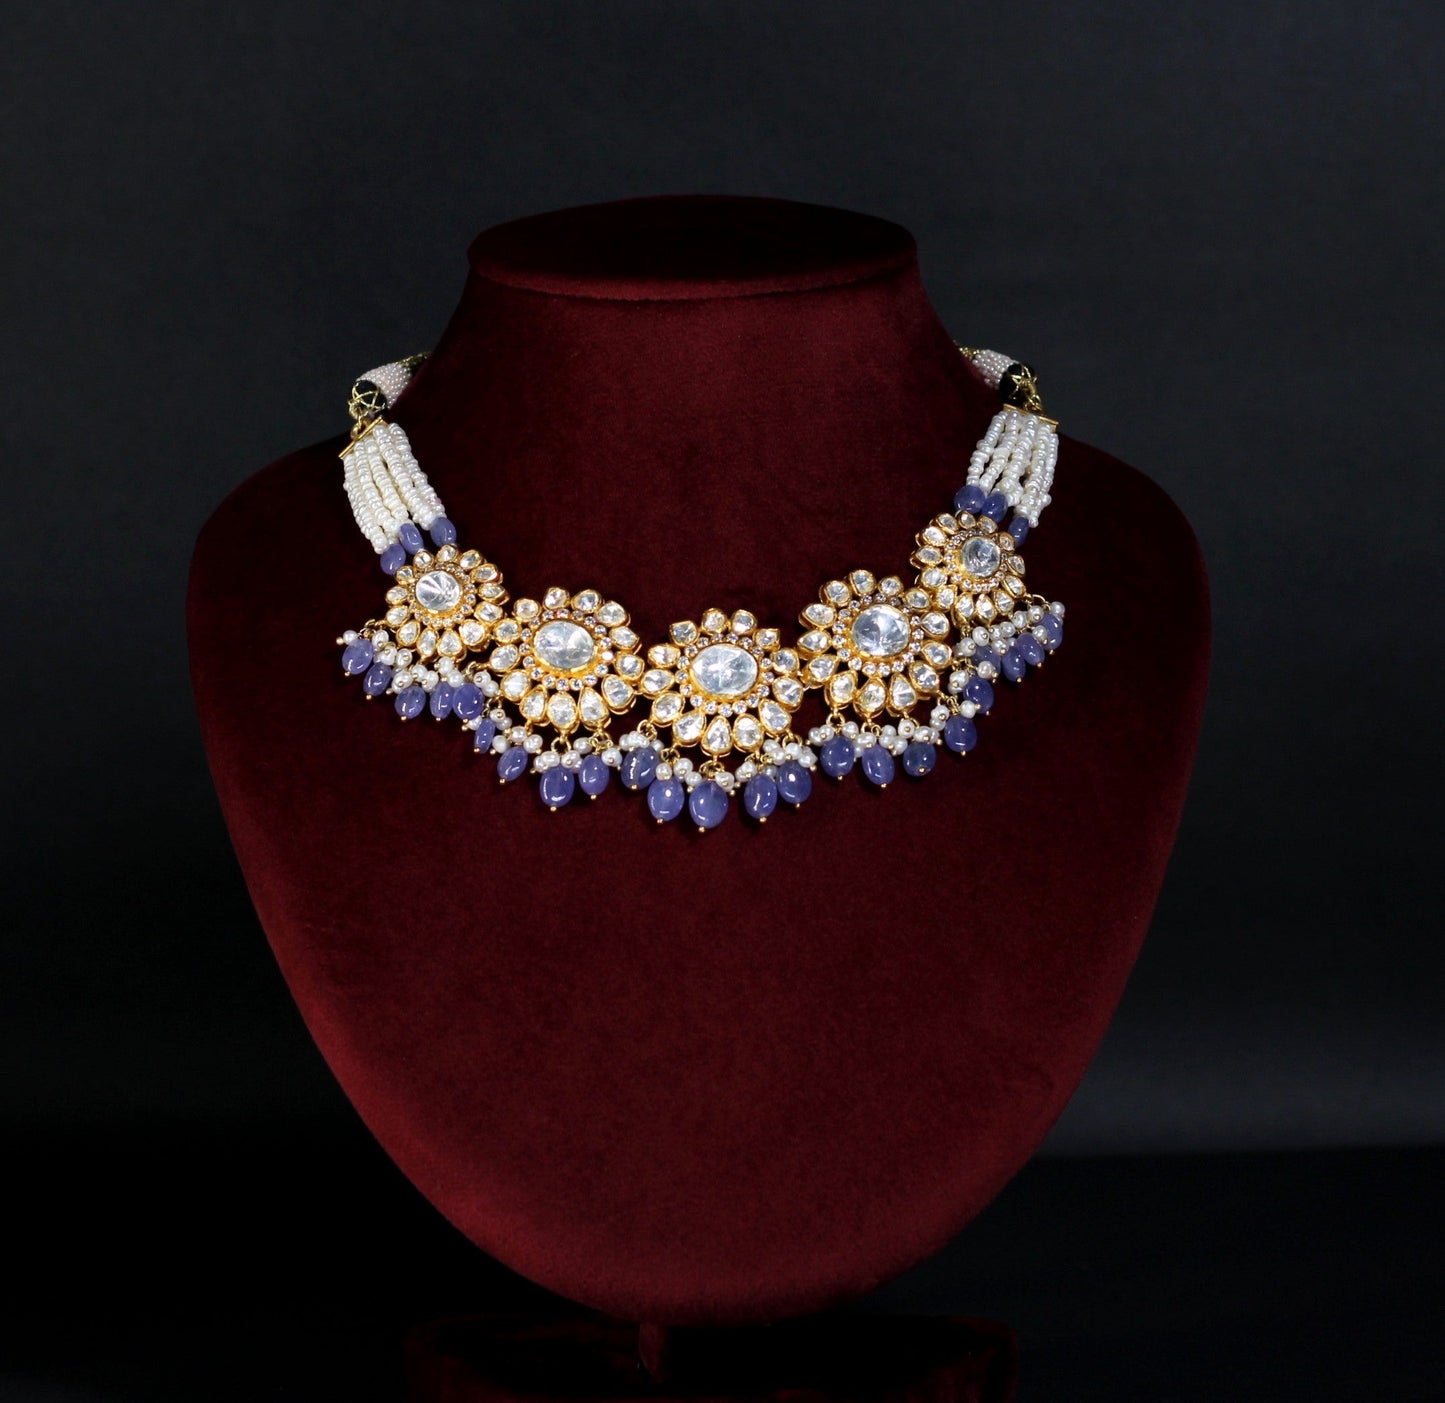 NECKLACE AND EARRING IN 92.5 STERLING SILVER IN  18KT GOLD PLATED WITH moissanite POLKI AND BLUE CHALCEDONY stones AND ZIRCONIA